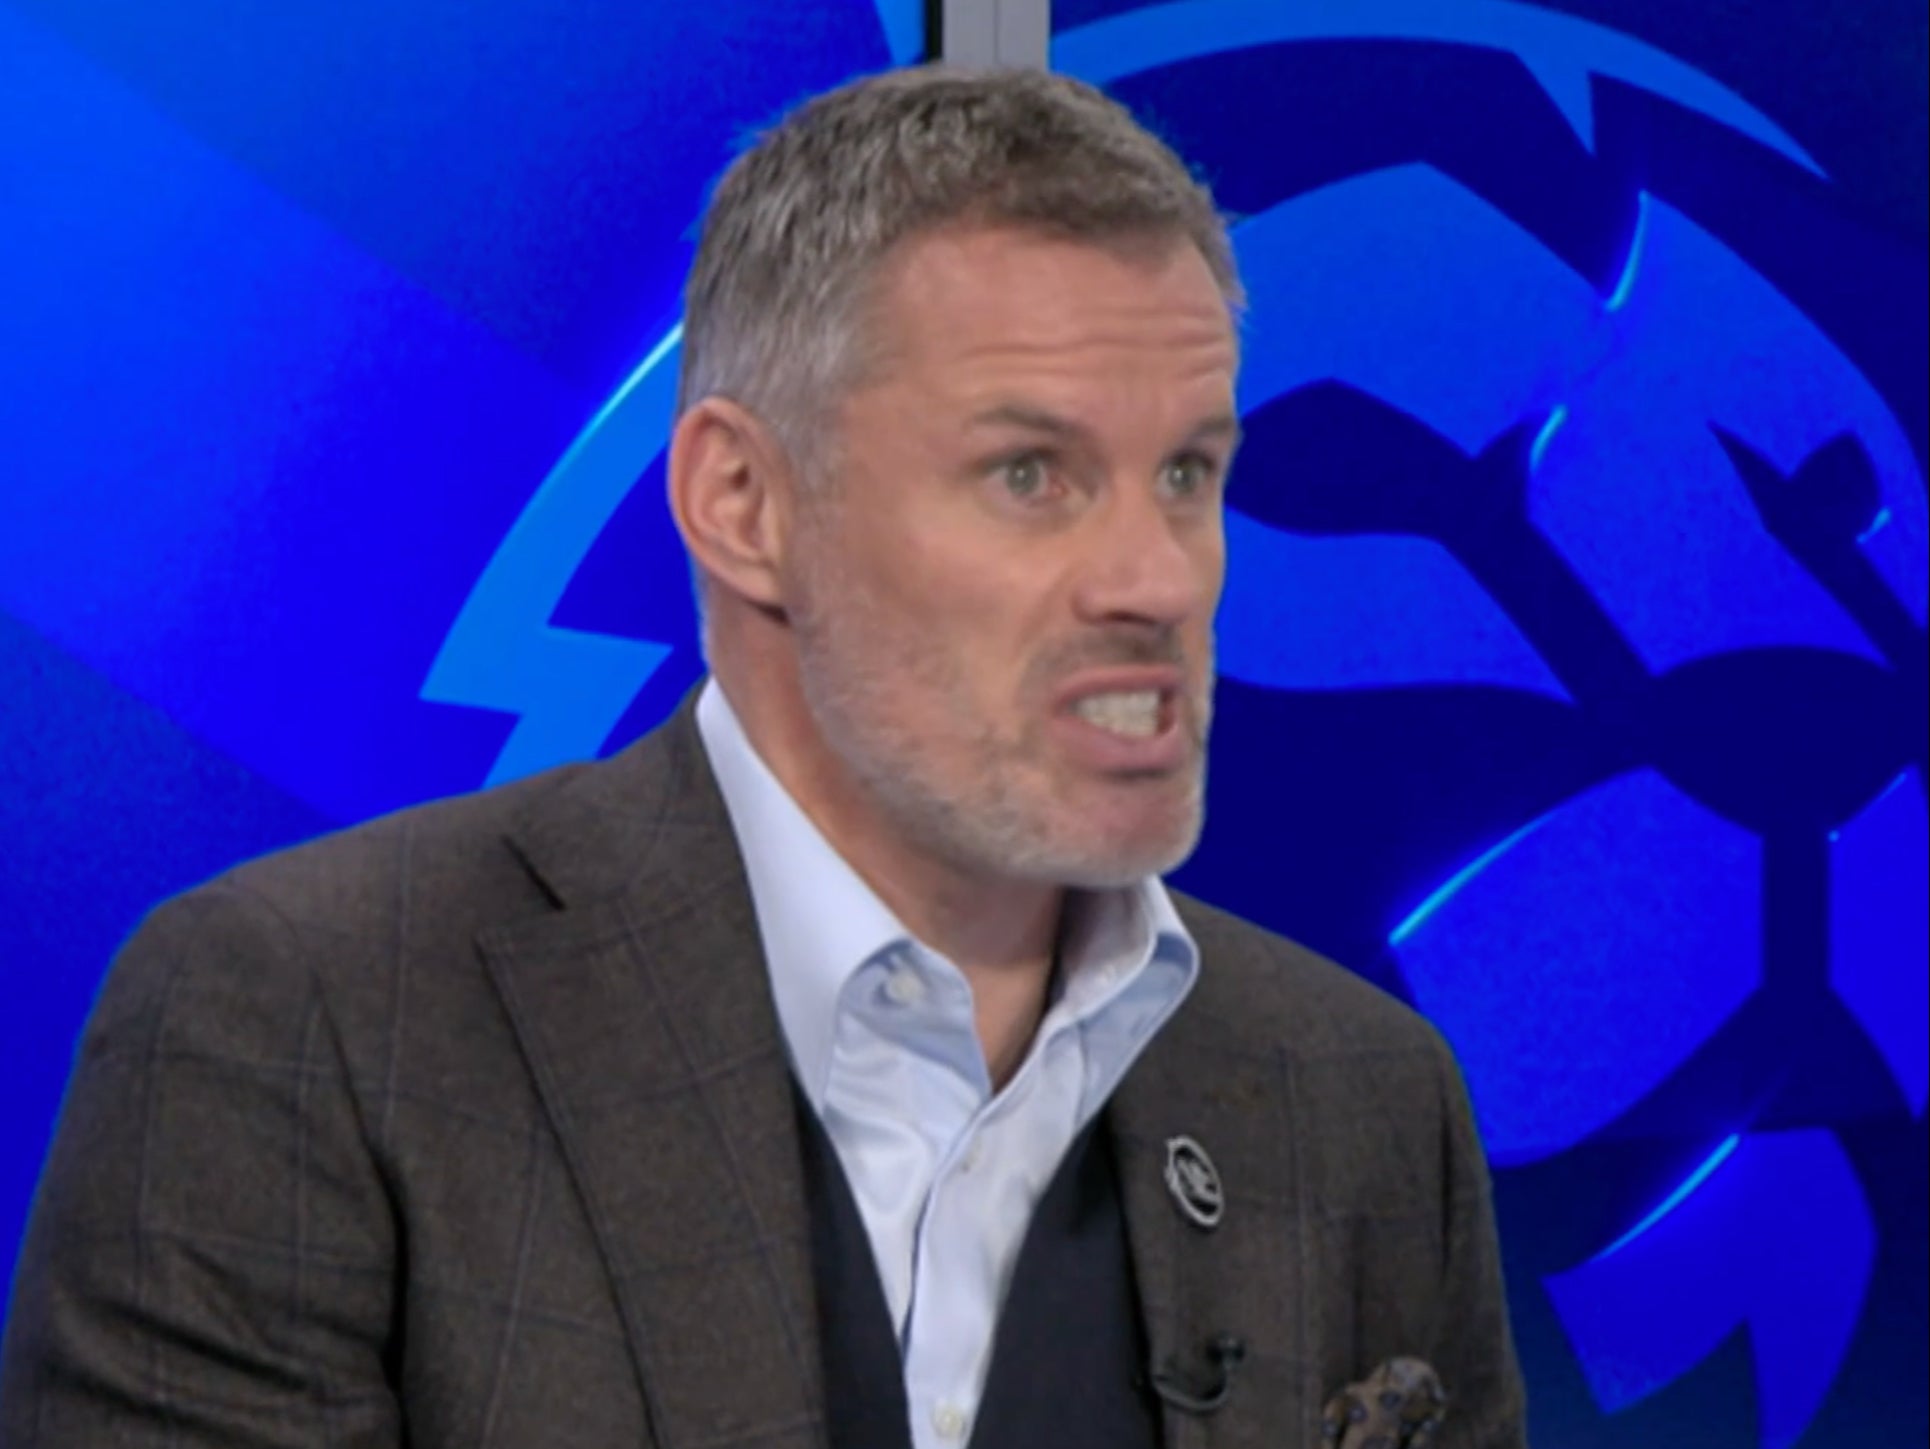 Jamie Carragher waded into an argument on social media